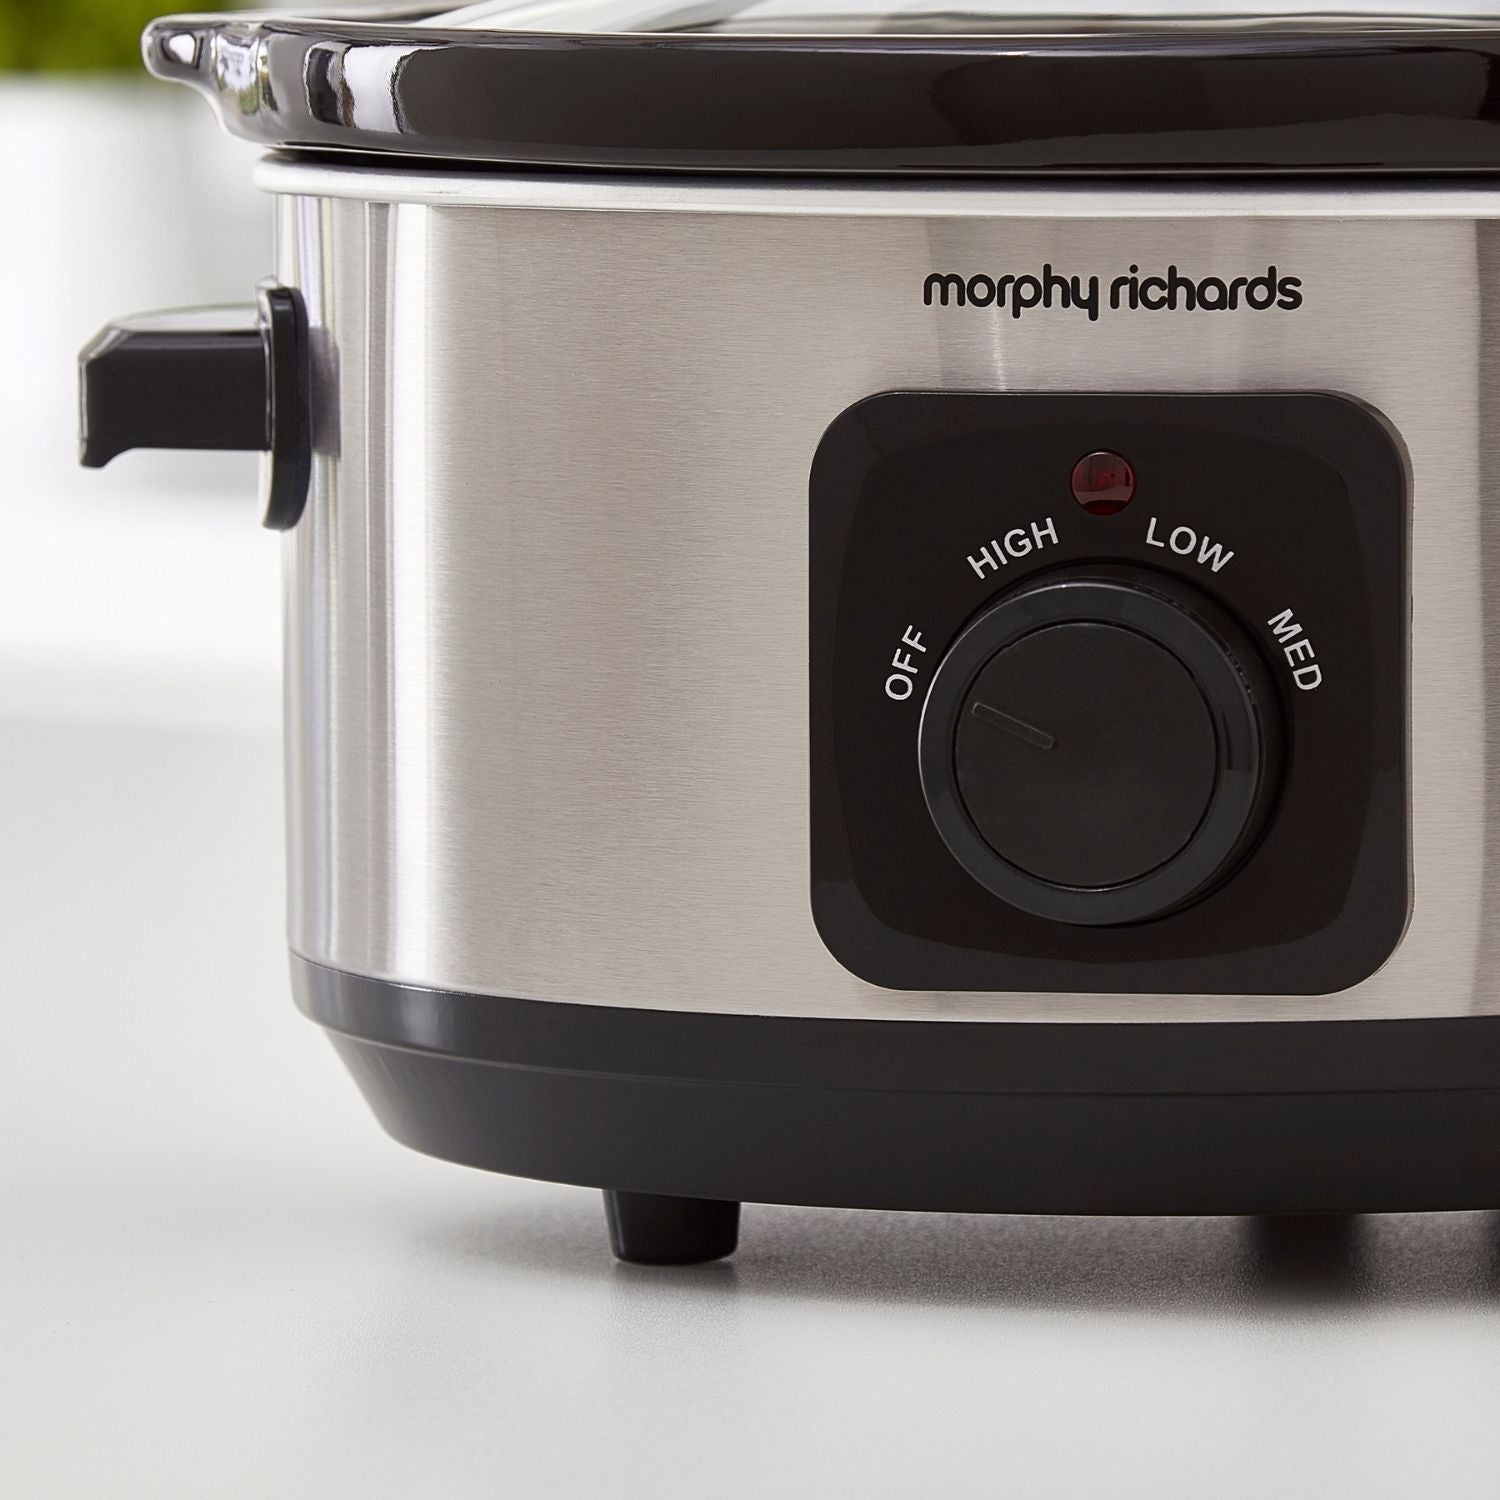 Morphy Richards Slow Cooker - 3.5L 4 Shaws Department Stores